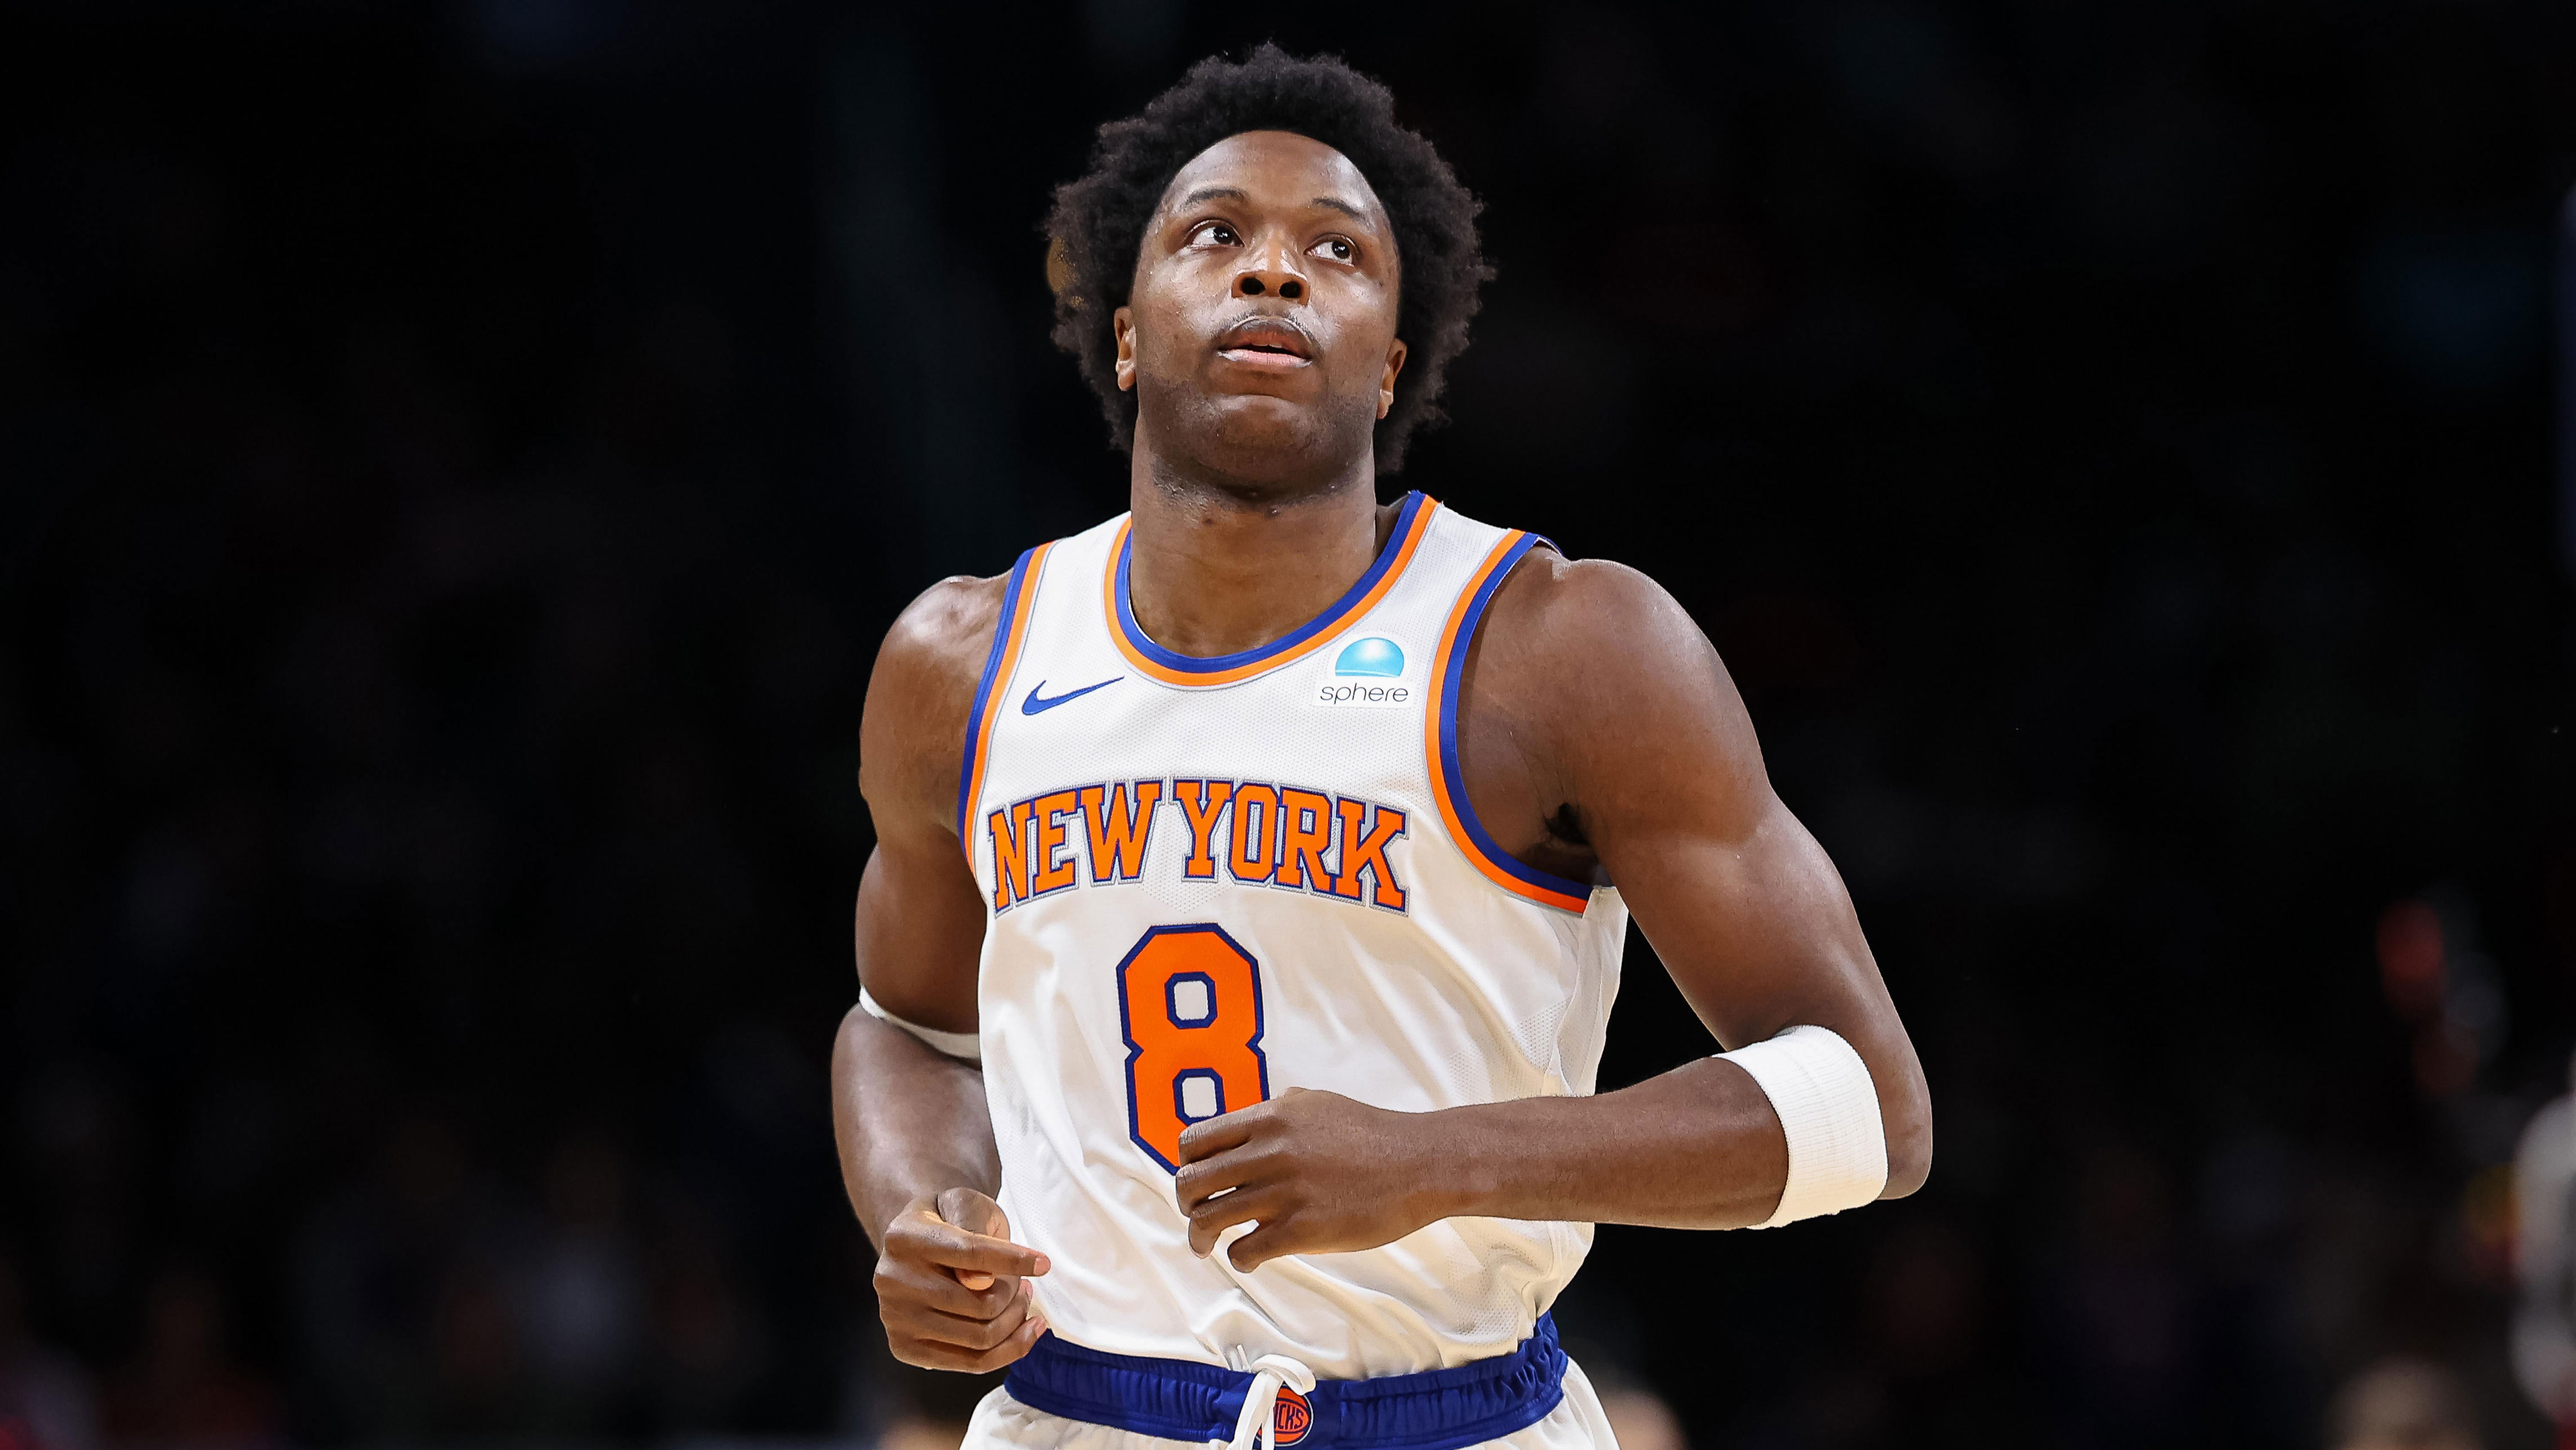 The Knicks are dominating defensively, and OG Anunoby is not the only